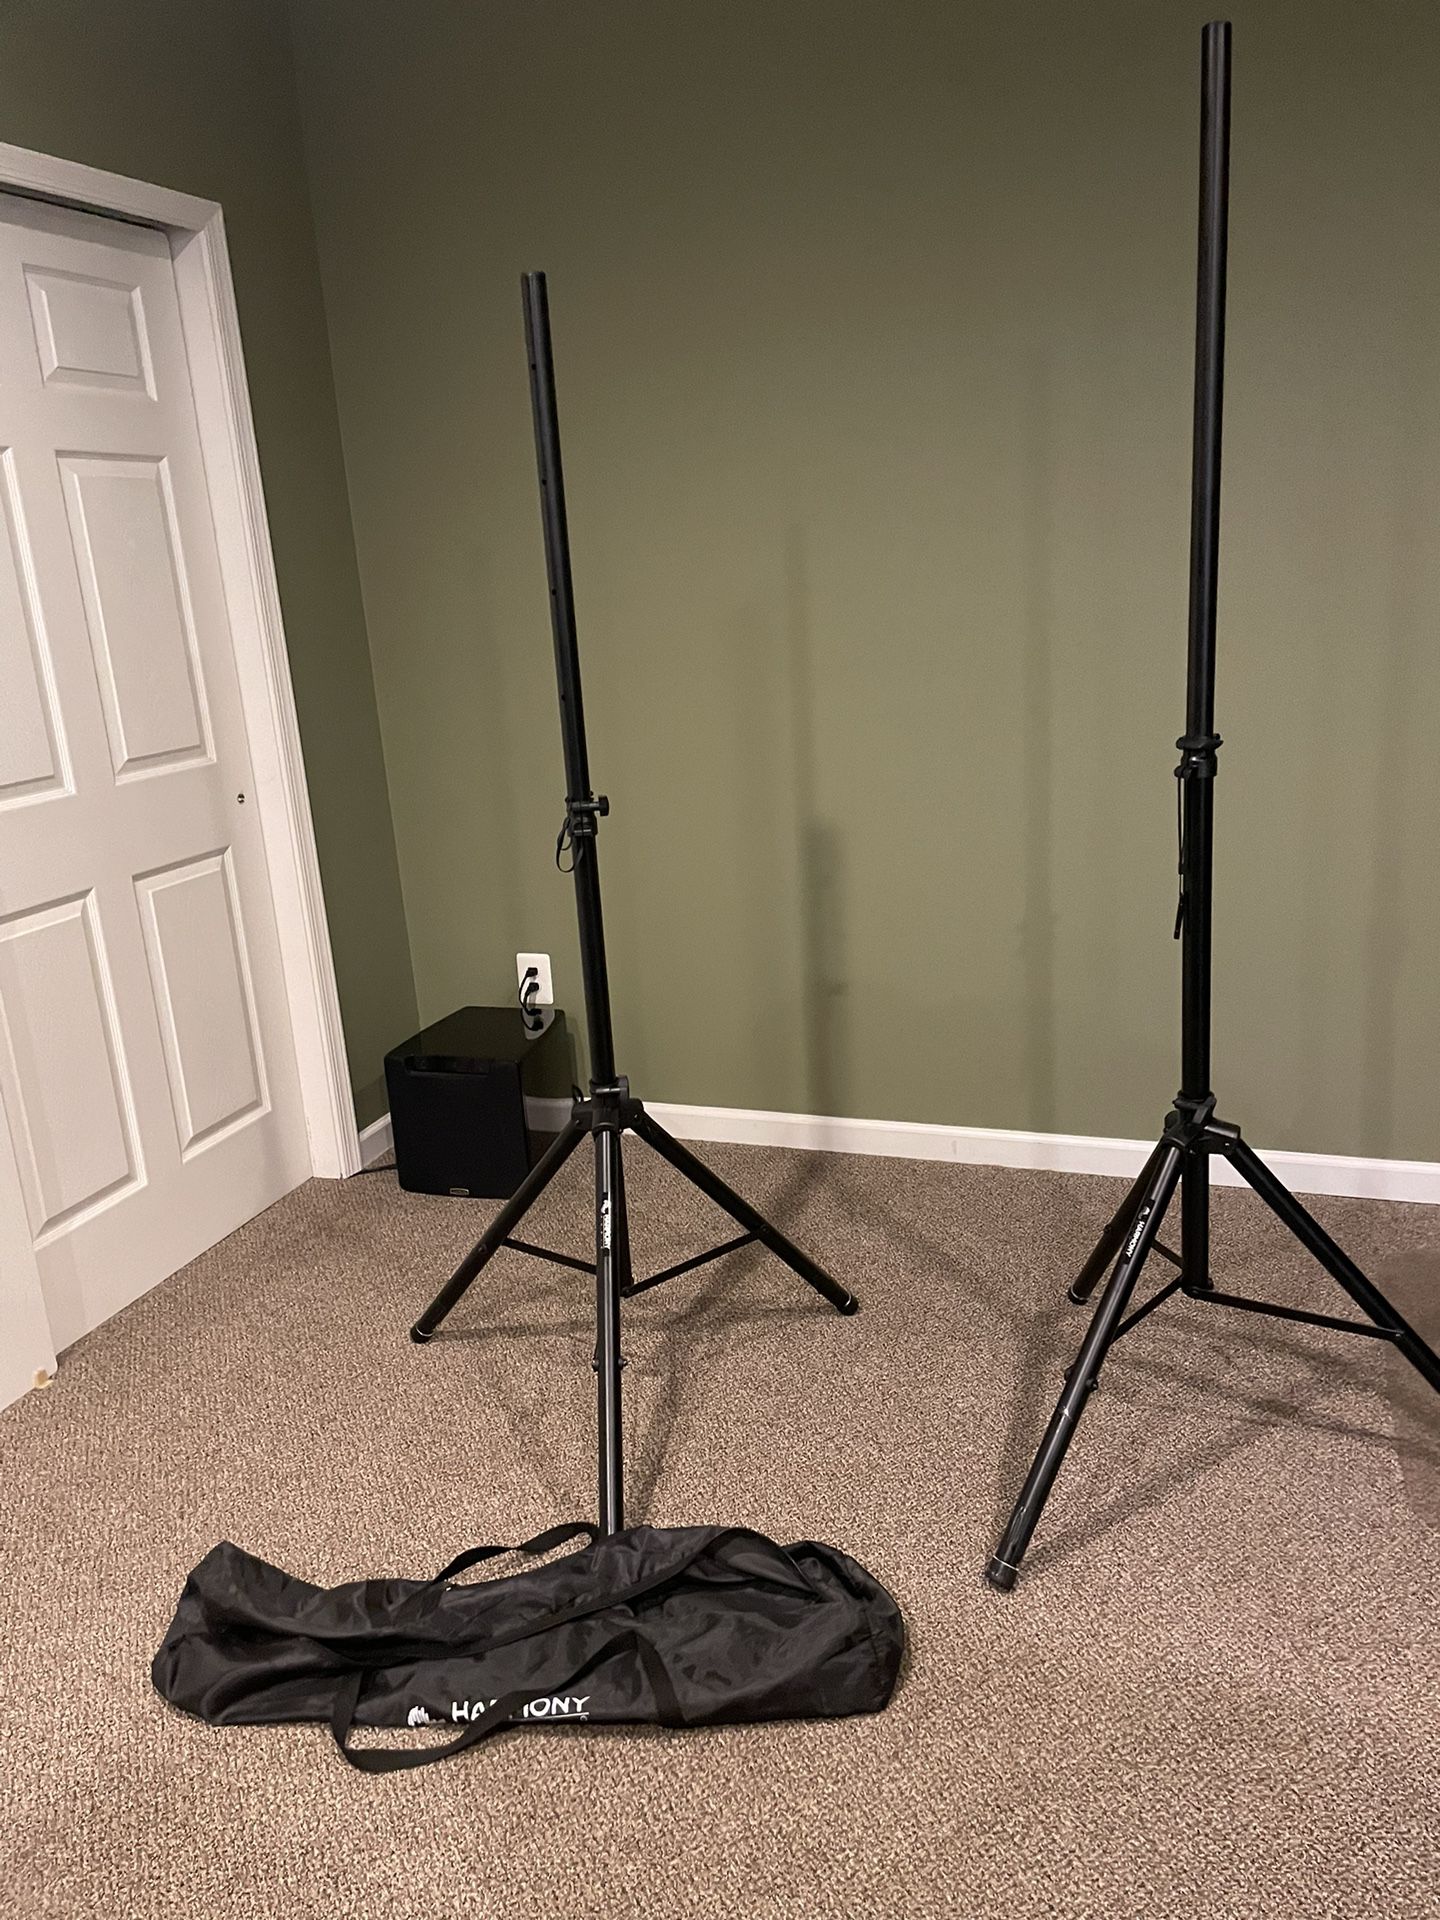 Pa Speaker Stands